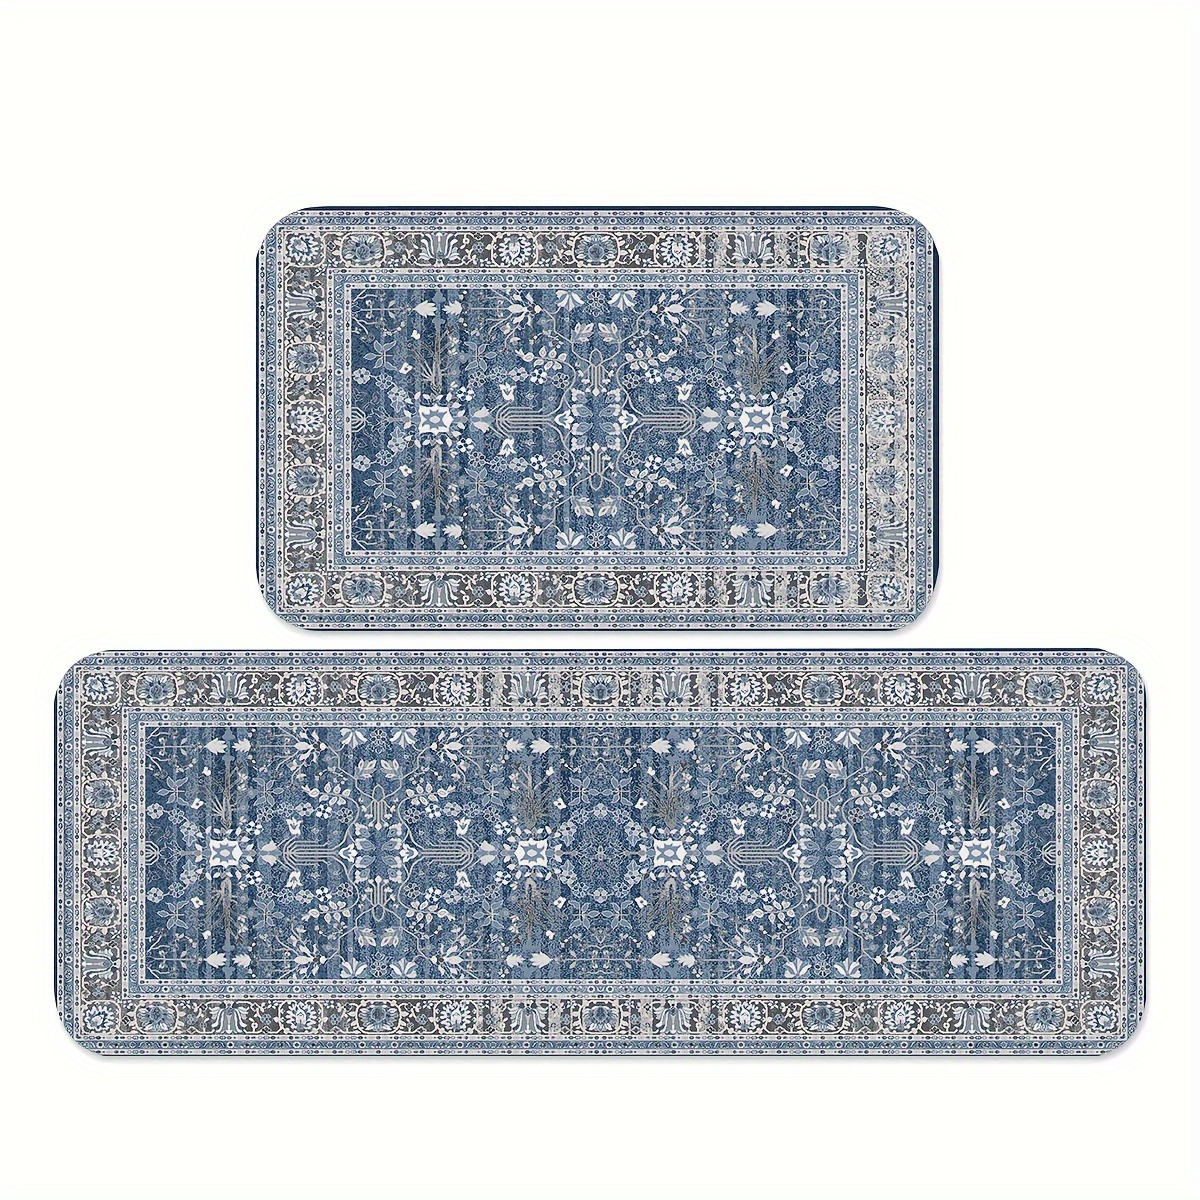 

1/2pcs Chinese Style Kitchen Mats, Comfortable Bath Foot Pads, Non-slip And Washable Floating Window Runner Rugs, Carpets For Kitchen, Home, Office, Sink, Laundry, Bathroom, Spring Decor, Sets 2 Piece